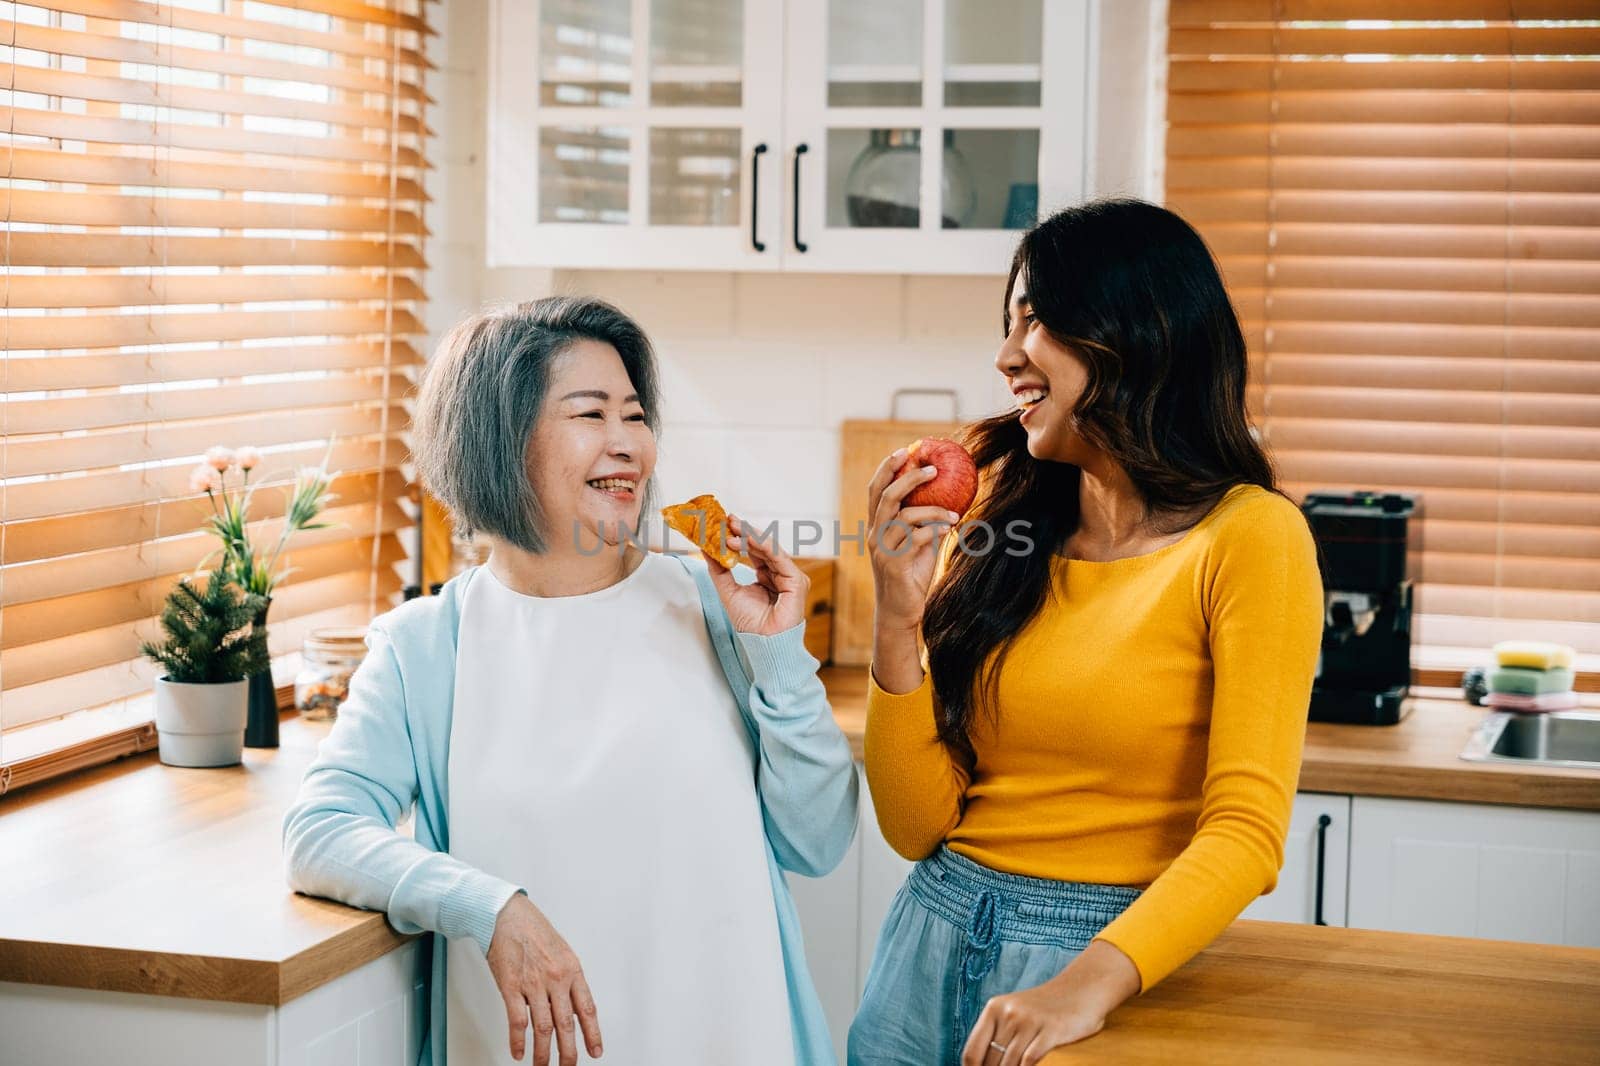 At home, an old mother and her daughter, a young woman, share quality time in the kitchen. The daughter is assisting her mother, creating a heartwarming portrait of family togetherness and care.